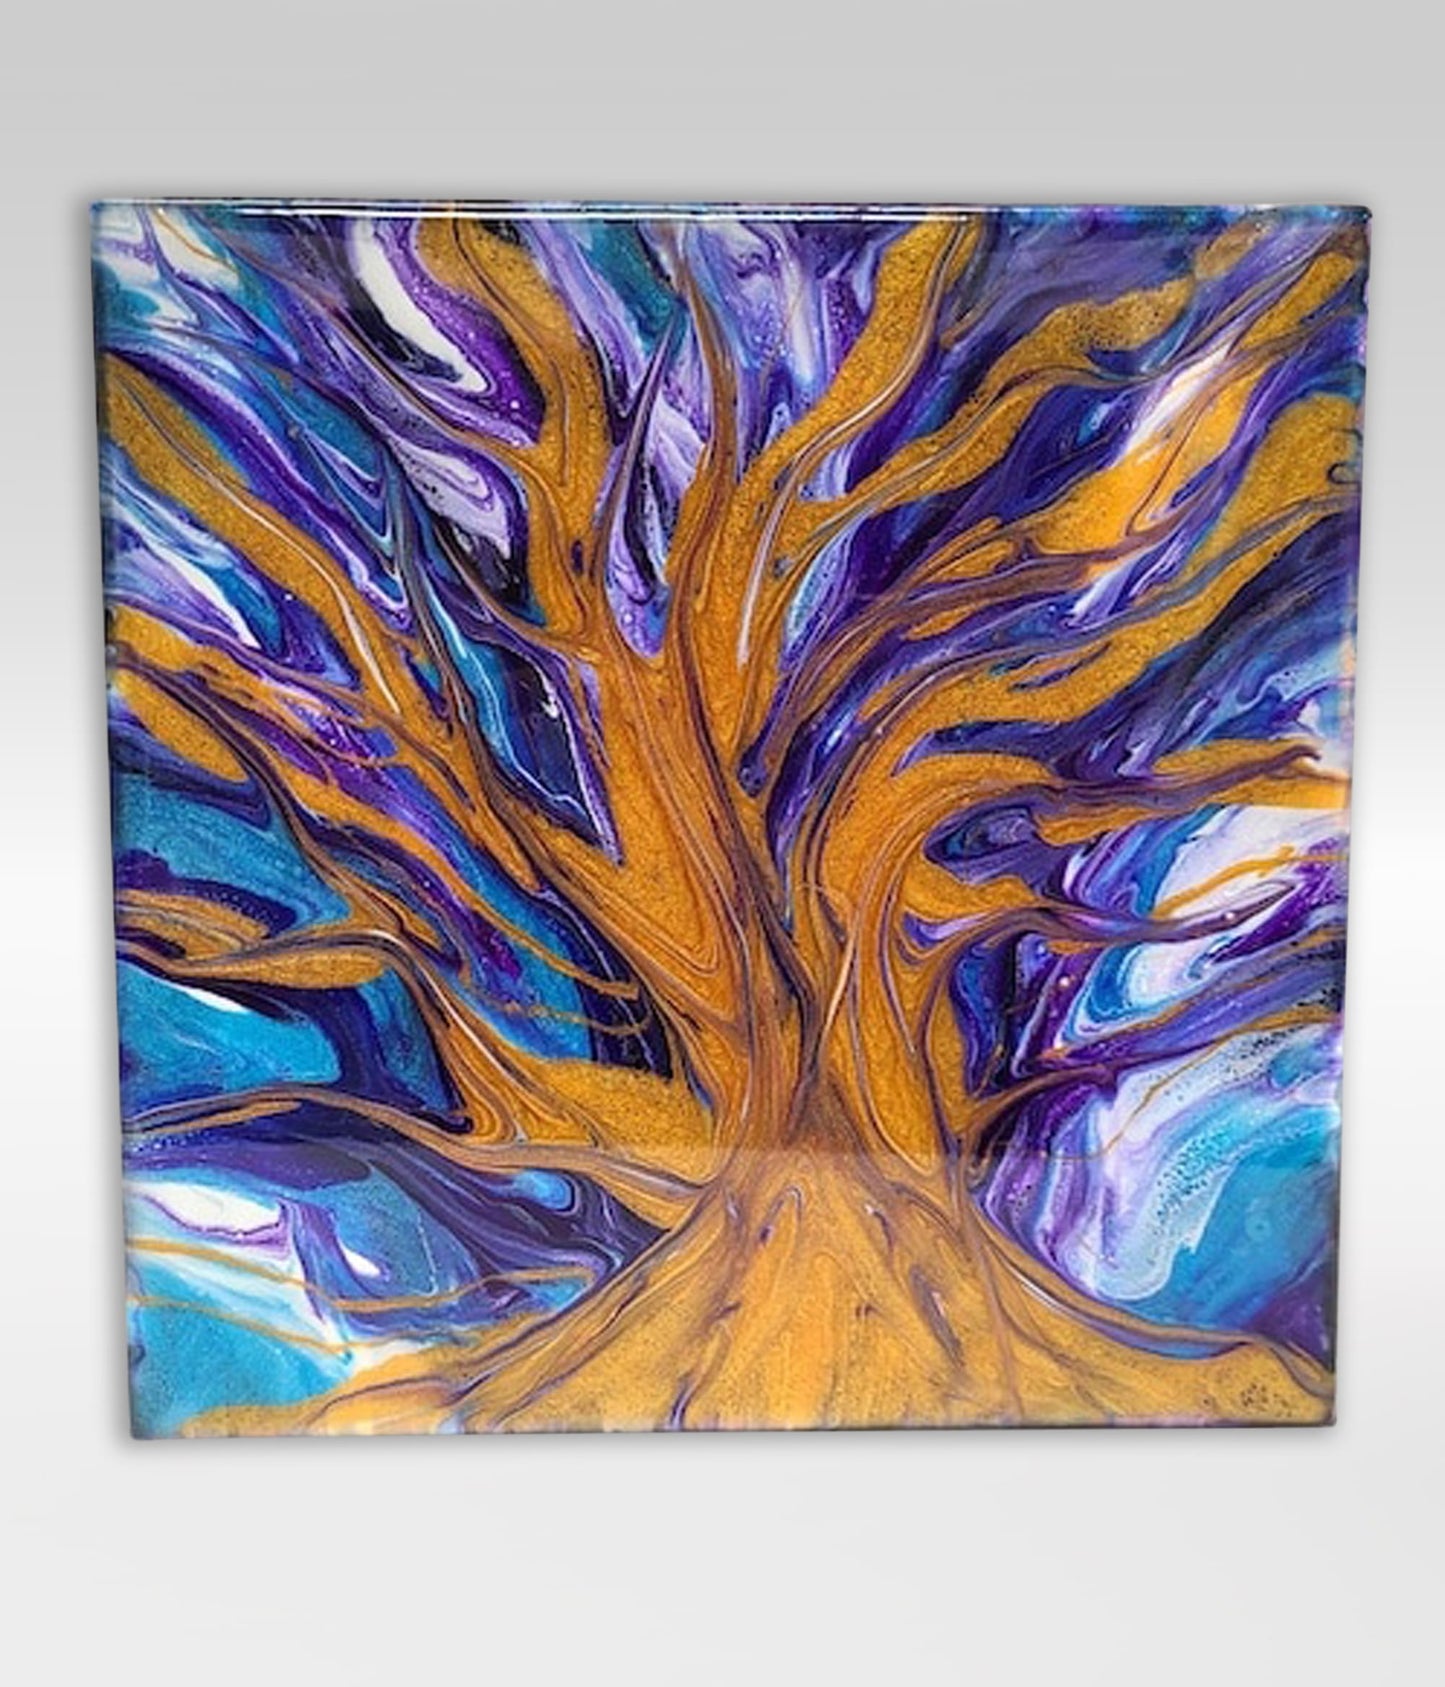 Flaming Bush – 10 x 10 Resin Painting On Canvas